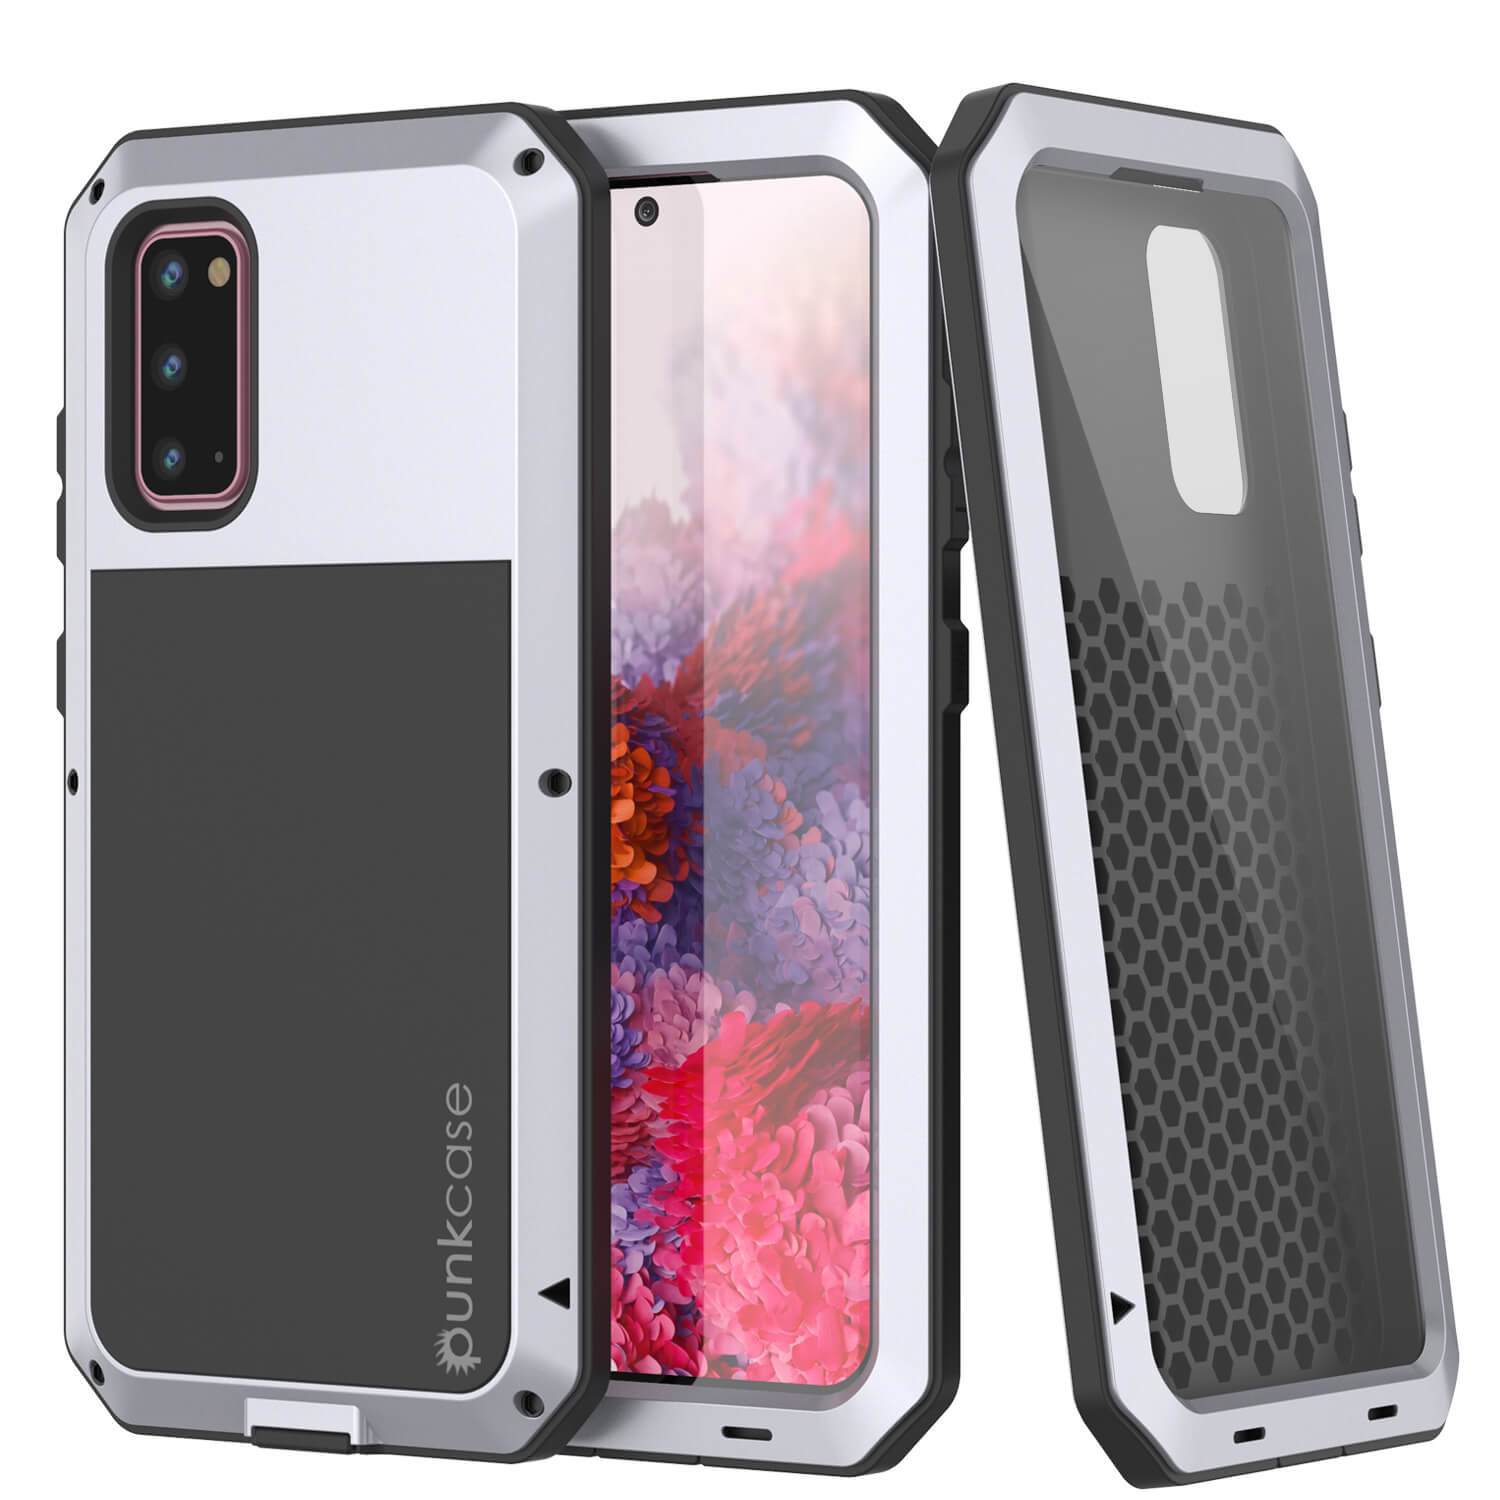 Galaxy s20 Metal Case, Heavy Duty Military Grade Rugged Armor Cover [White] (Color in image: White)